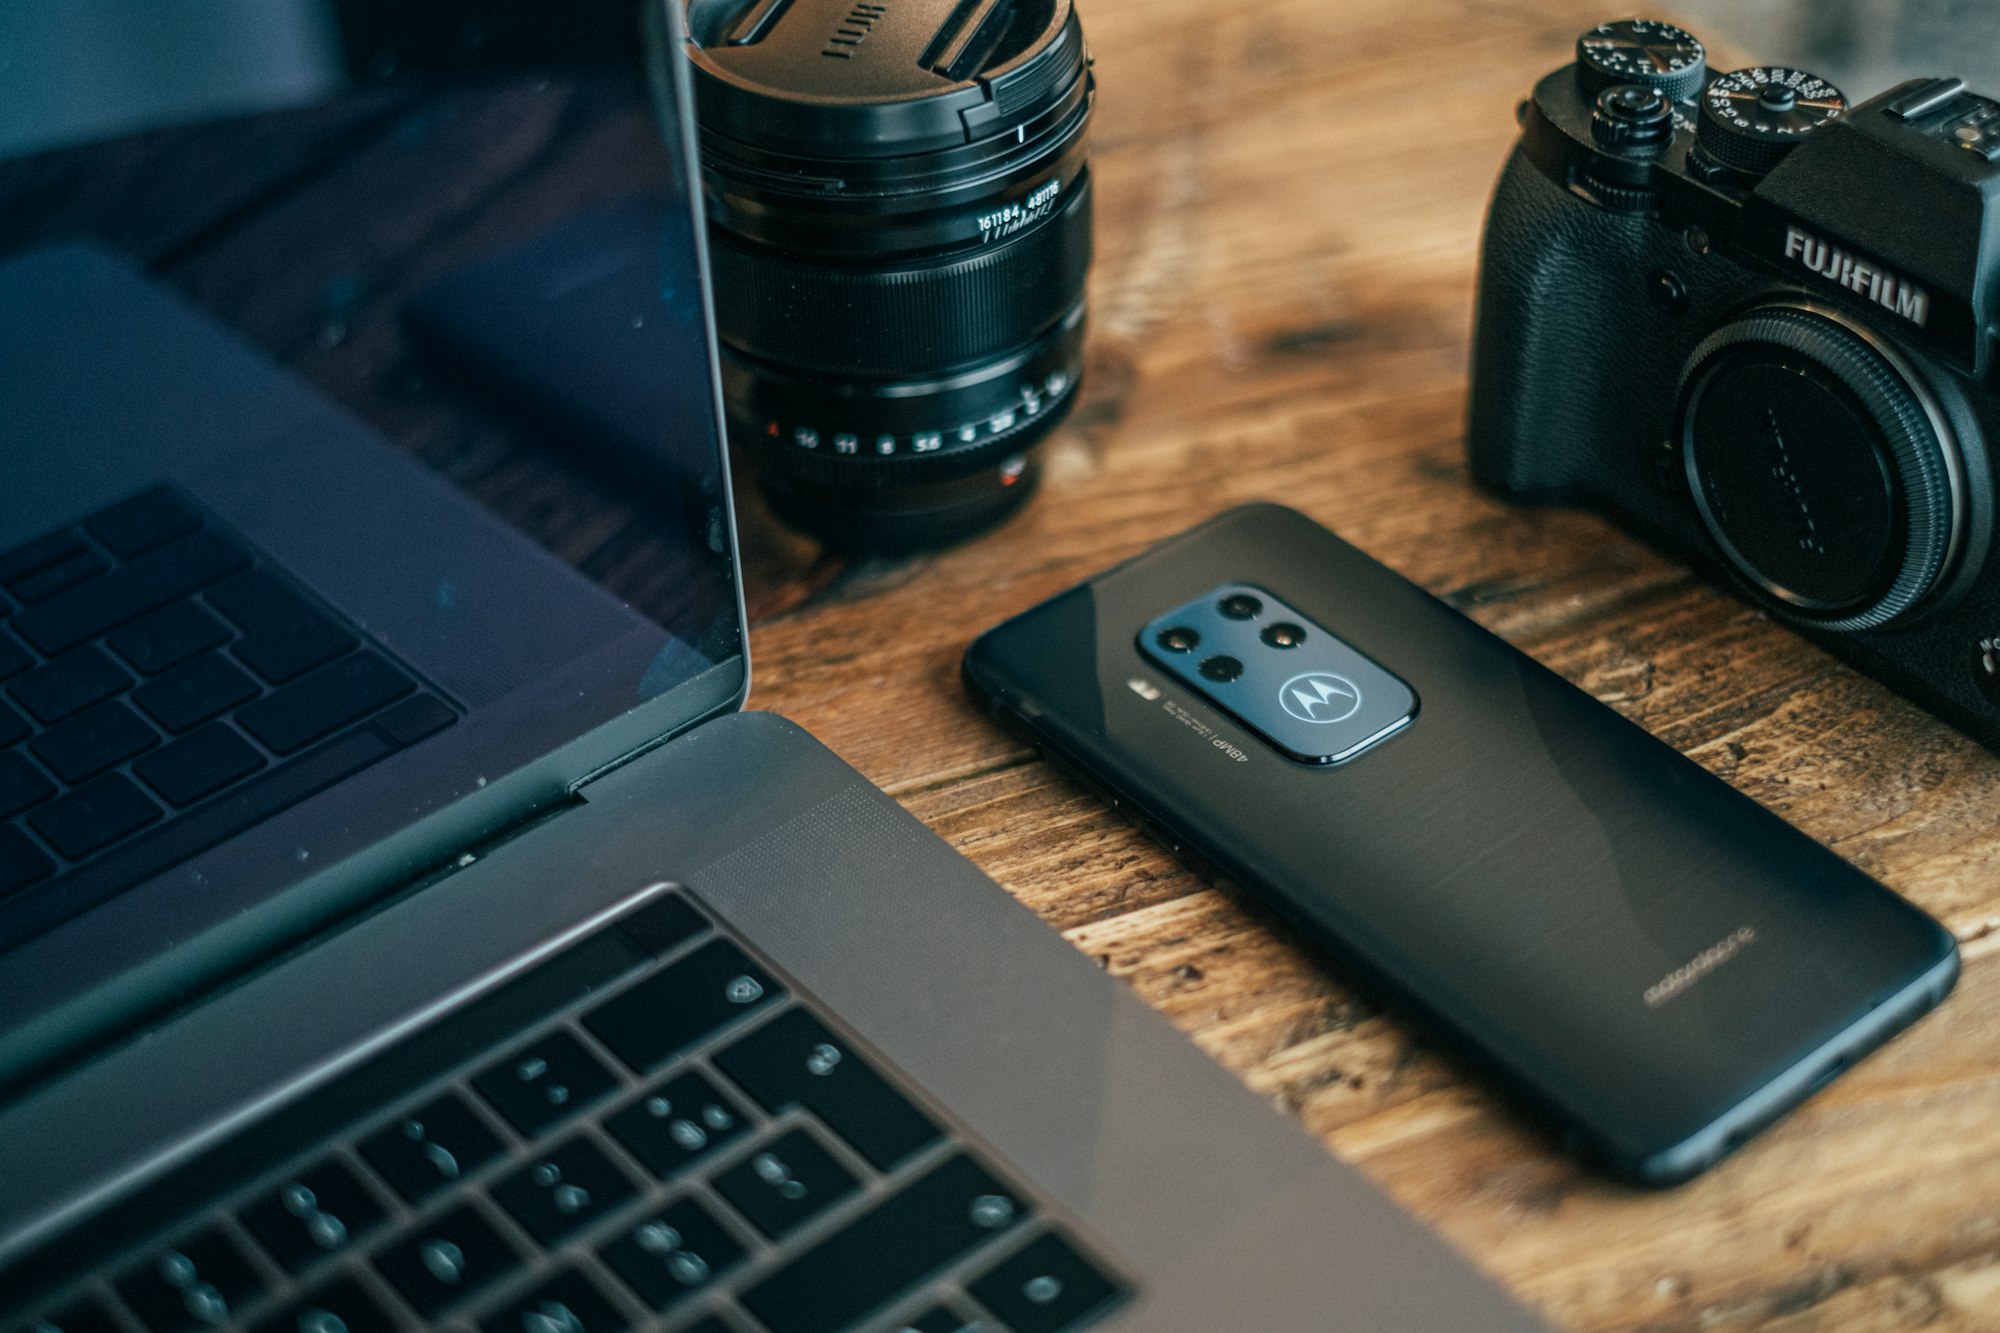 Motorola One Zoom smartphone on a table, next to the Fujifilm XT-3 and a Macbook Pro. Picture by Jonas Leupe (www.brandstof.studio) for Tandem Tech